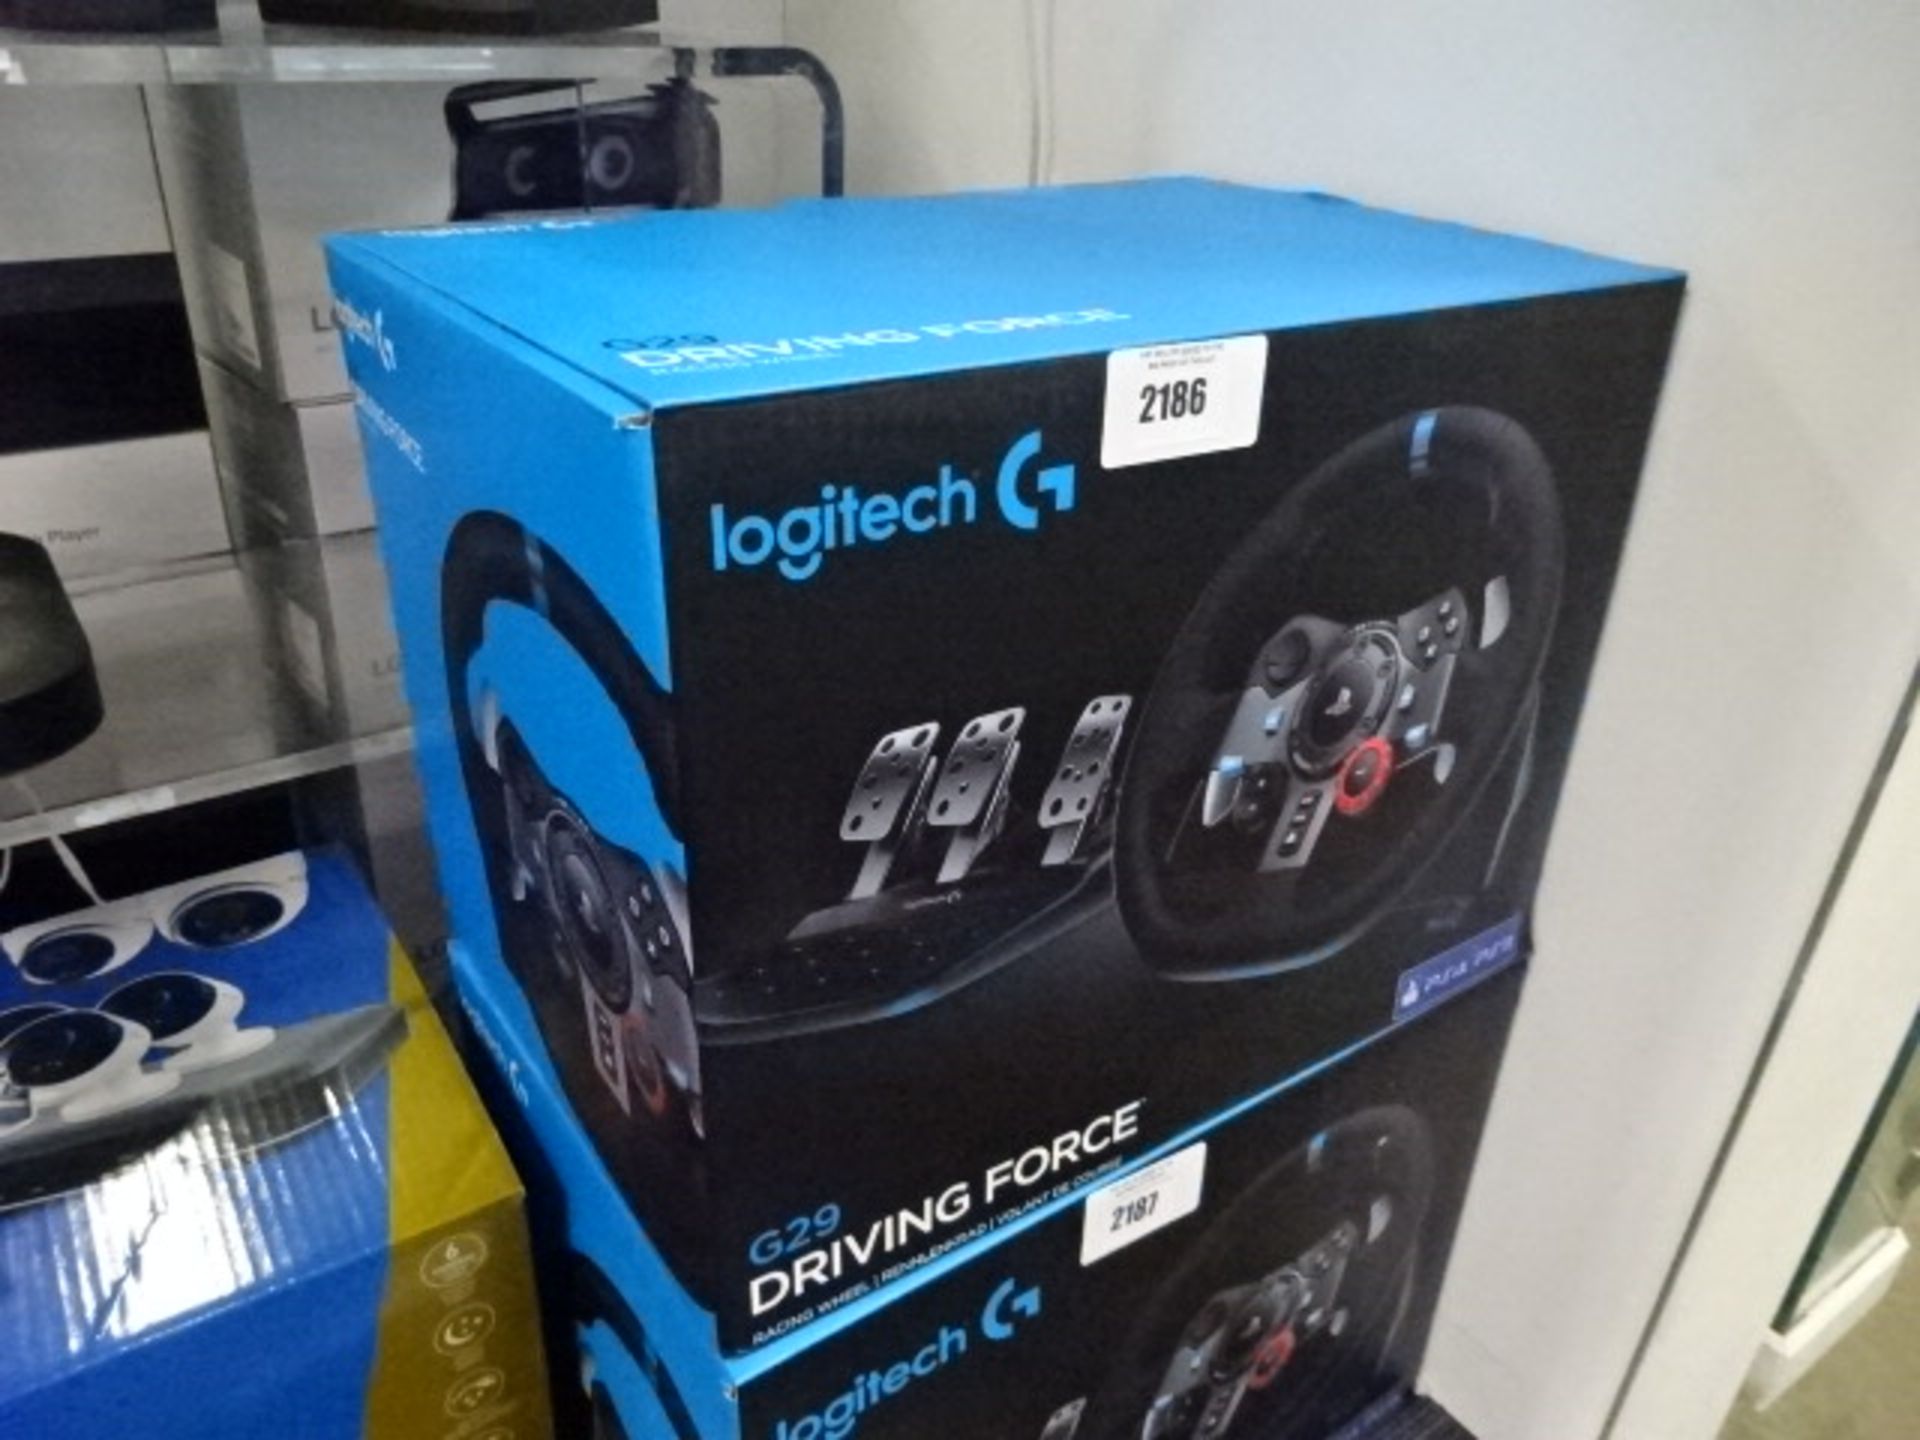 Logitech Driving Force G29 racing wheel for PS4 in box